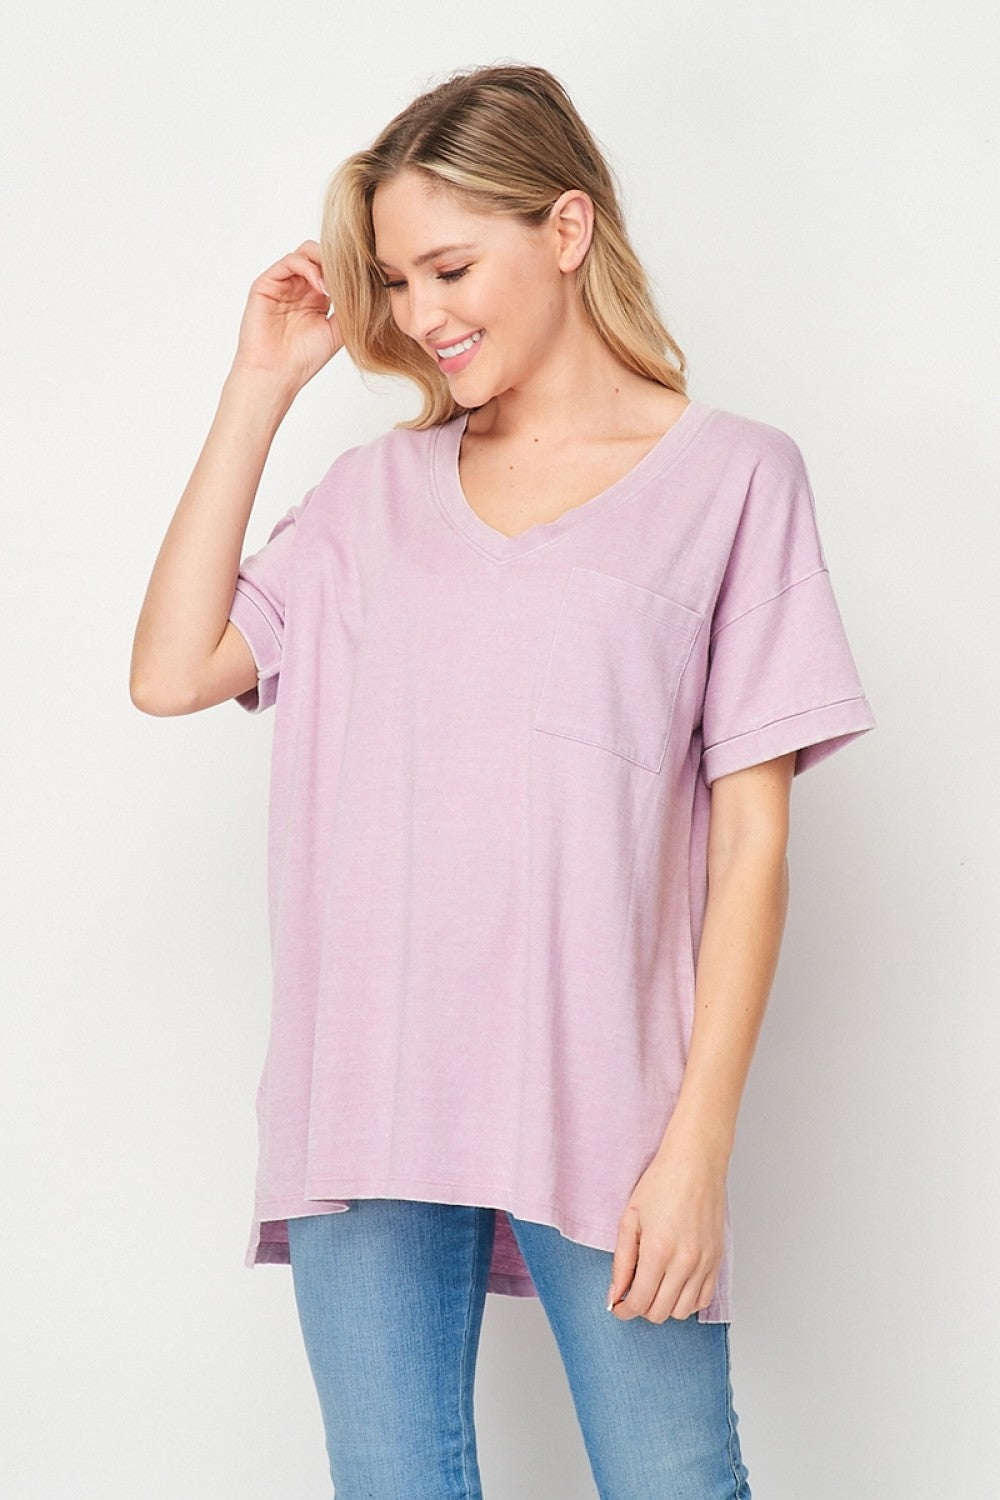 Mineral Wash Cuffed Sleeve Pocket Top  Ivy and Pearl Boutique Purple S 